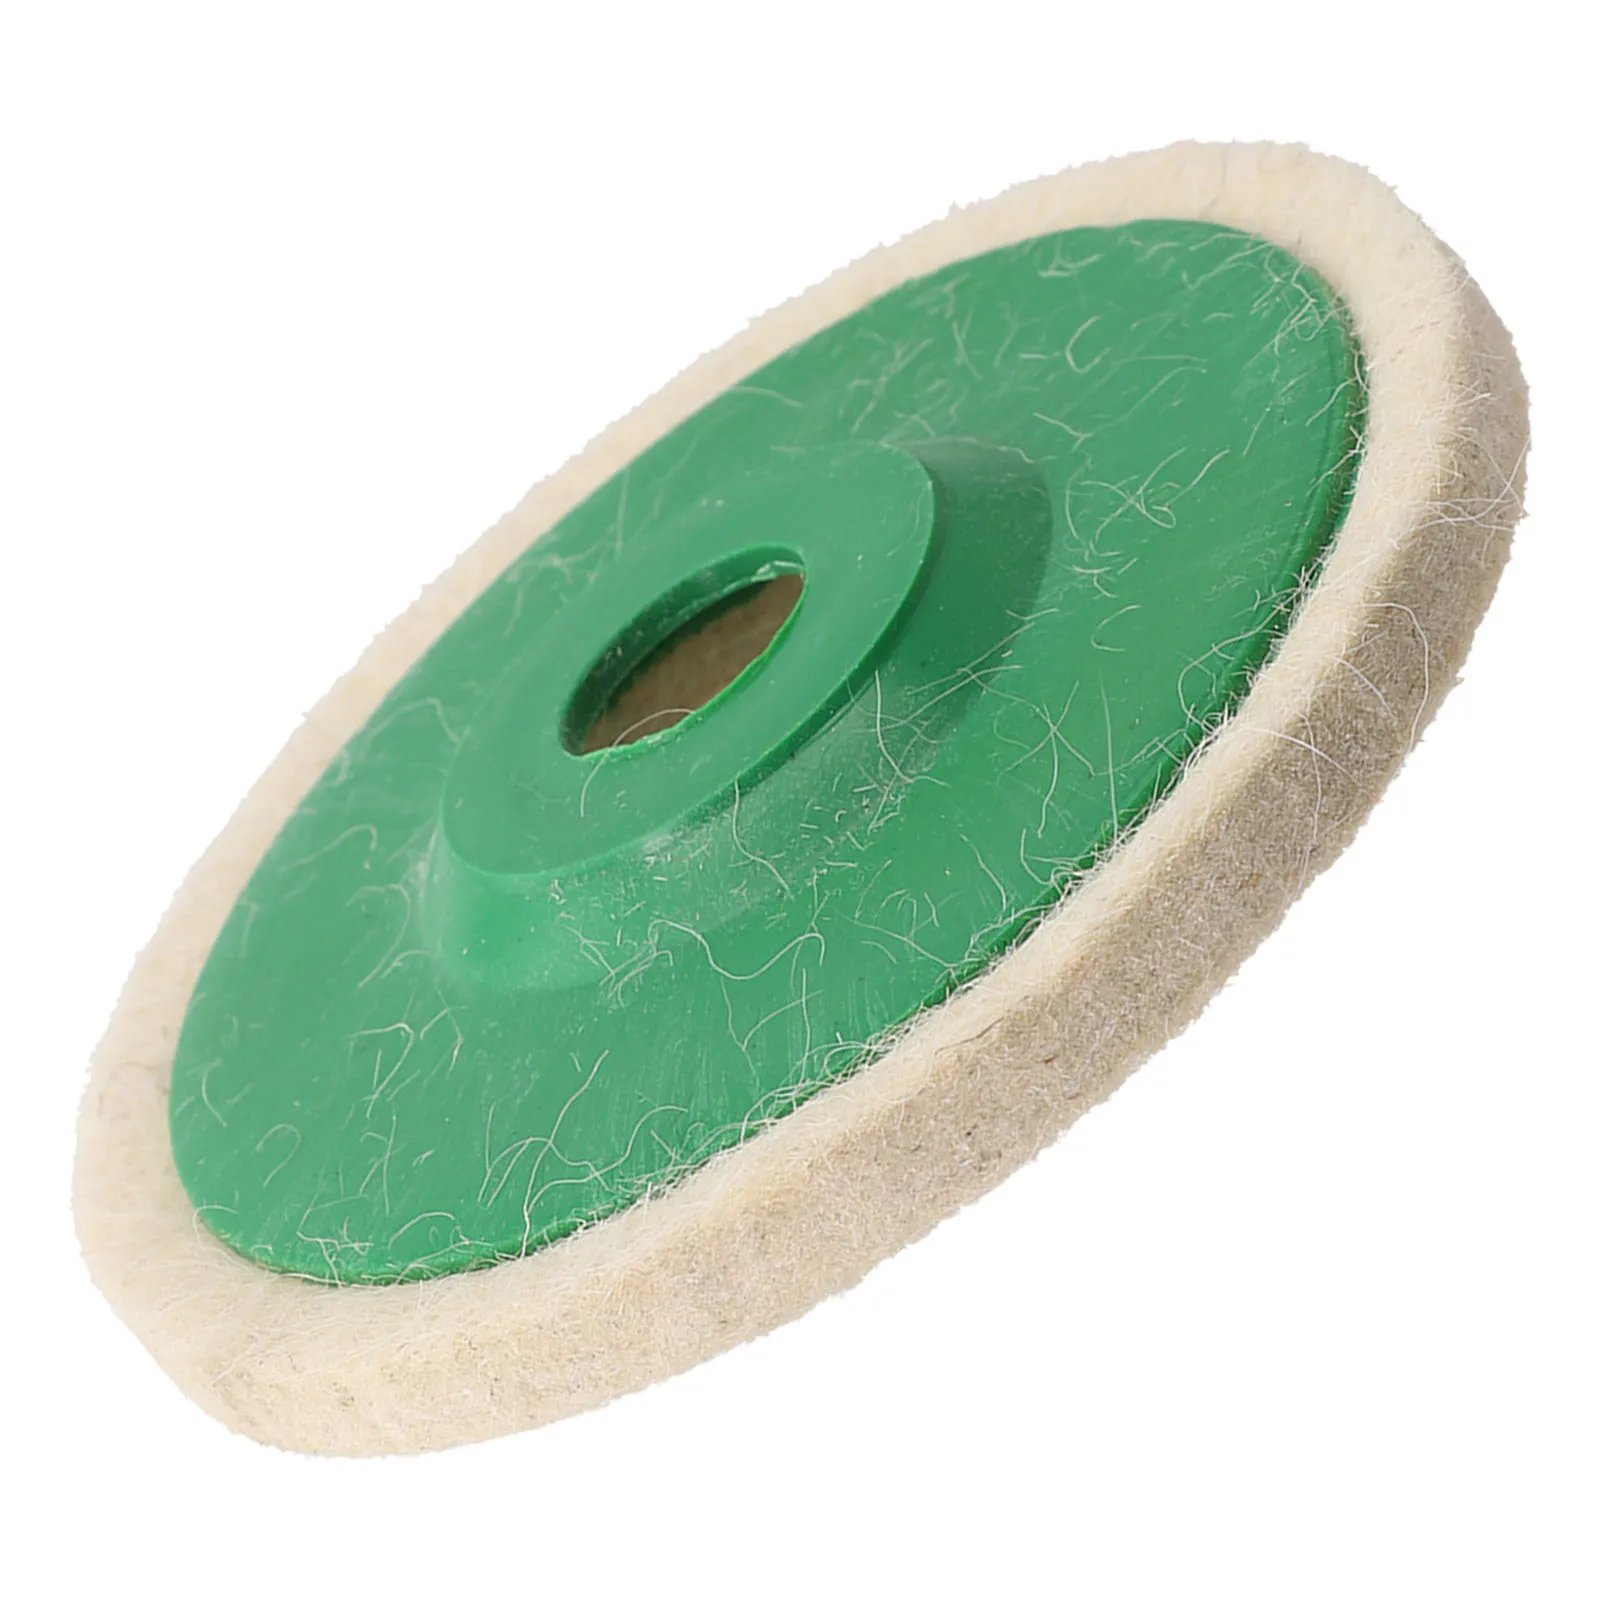 1 Pc 5Inch Wool Polishing Wheels Buffing Pads Angle Grinder Accessories Grinding Disc For Metal Glass Ceramic Polishing Tools z leap 6pcs 4 100mm diamond polishing pad kit marble granite ceramic buffing wheels flexible dry sanding disc for angle grinder